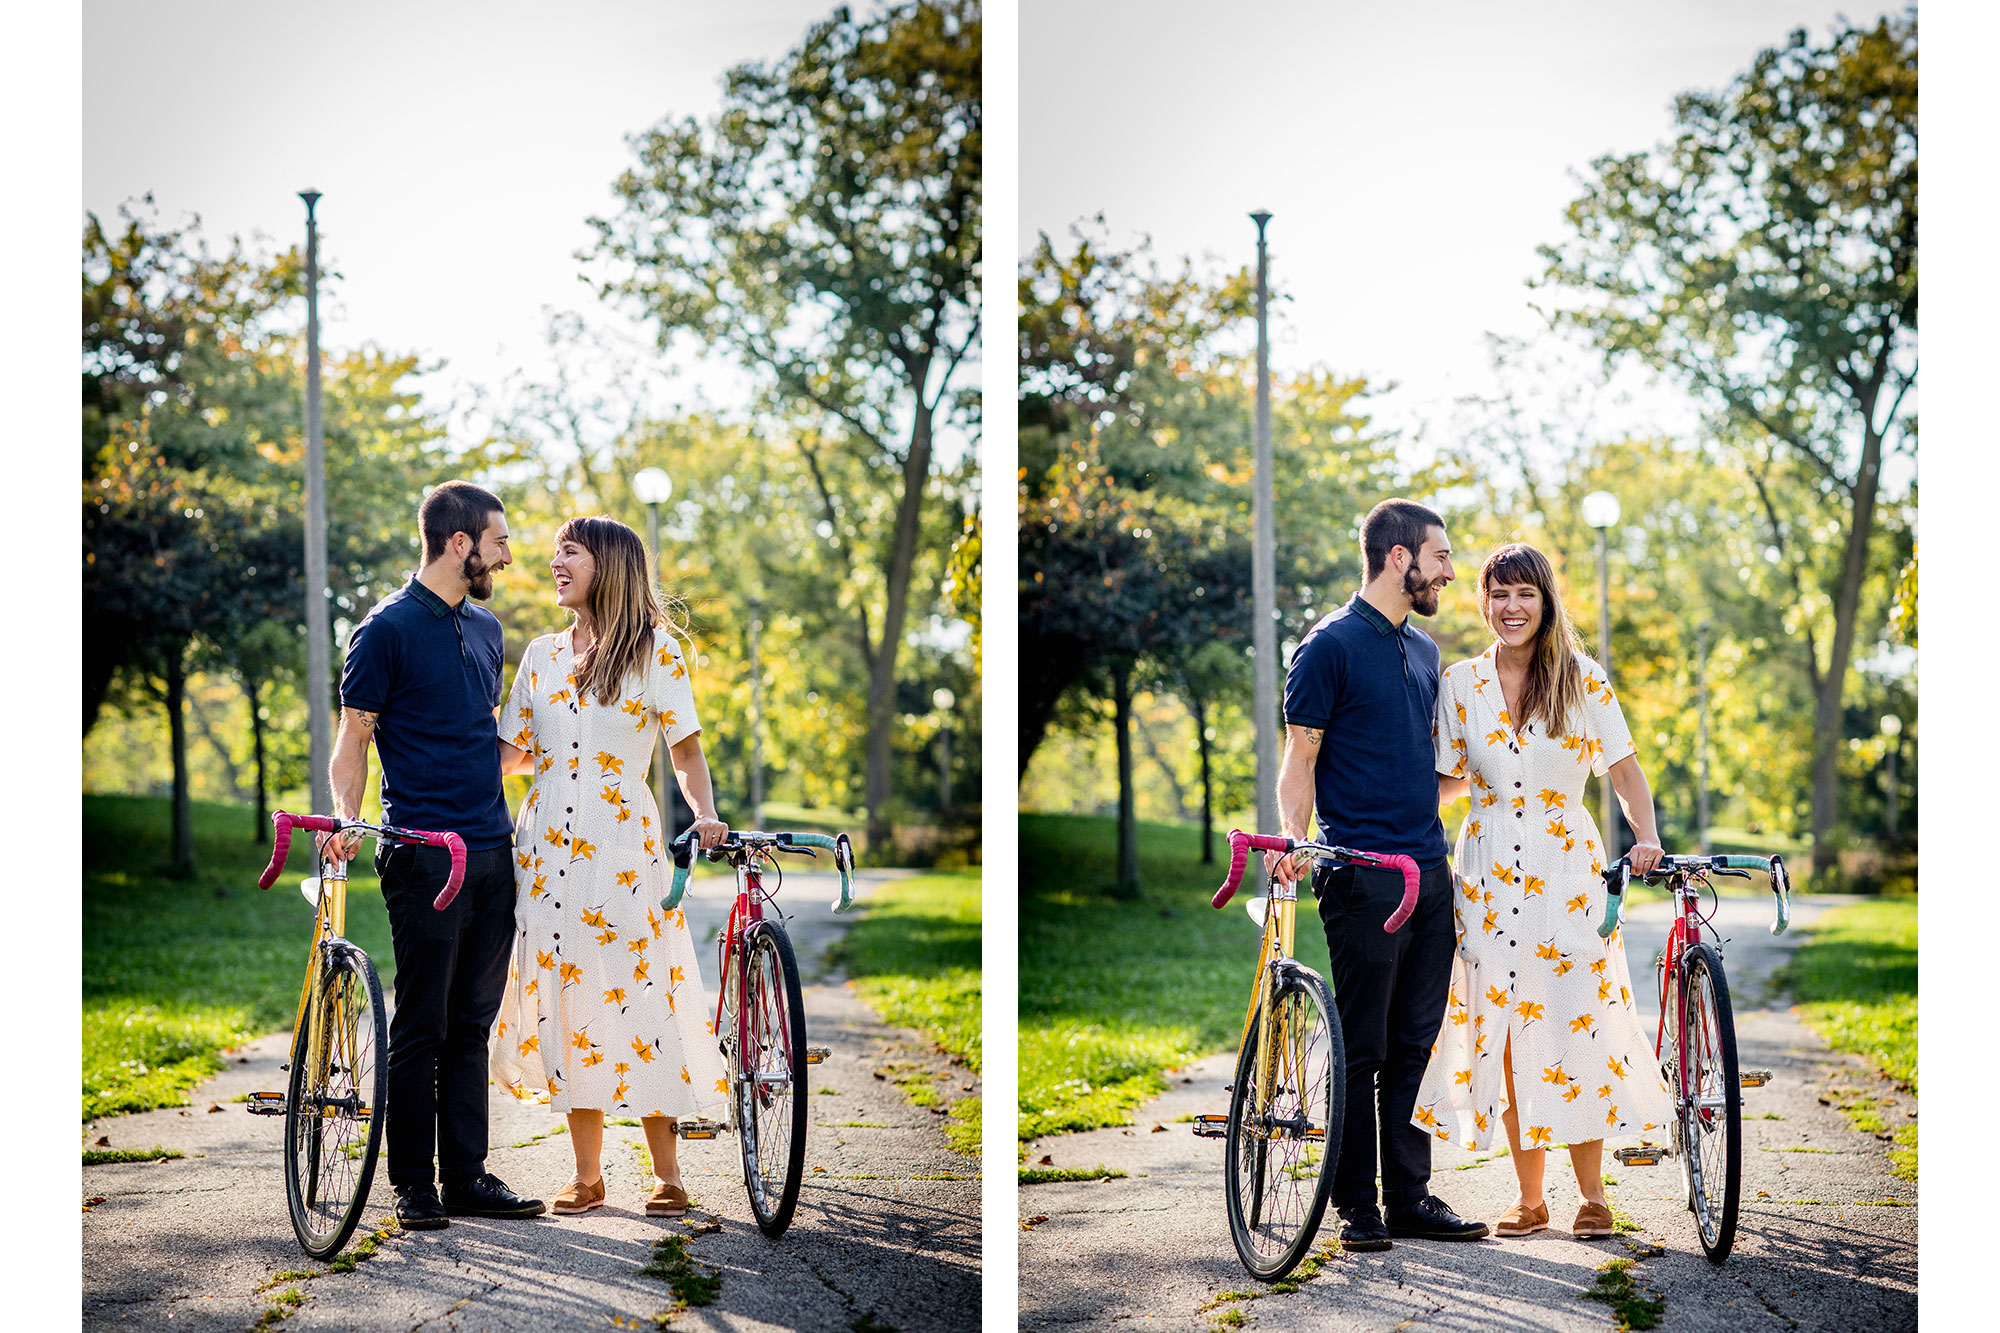 A couple laughs together before a bike ride during their Humboldt Park engagement session in Chicago.